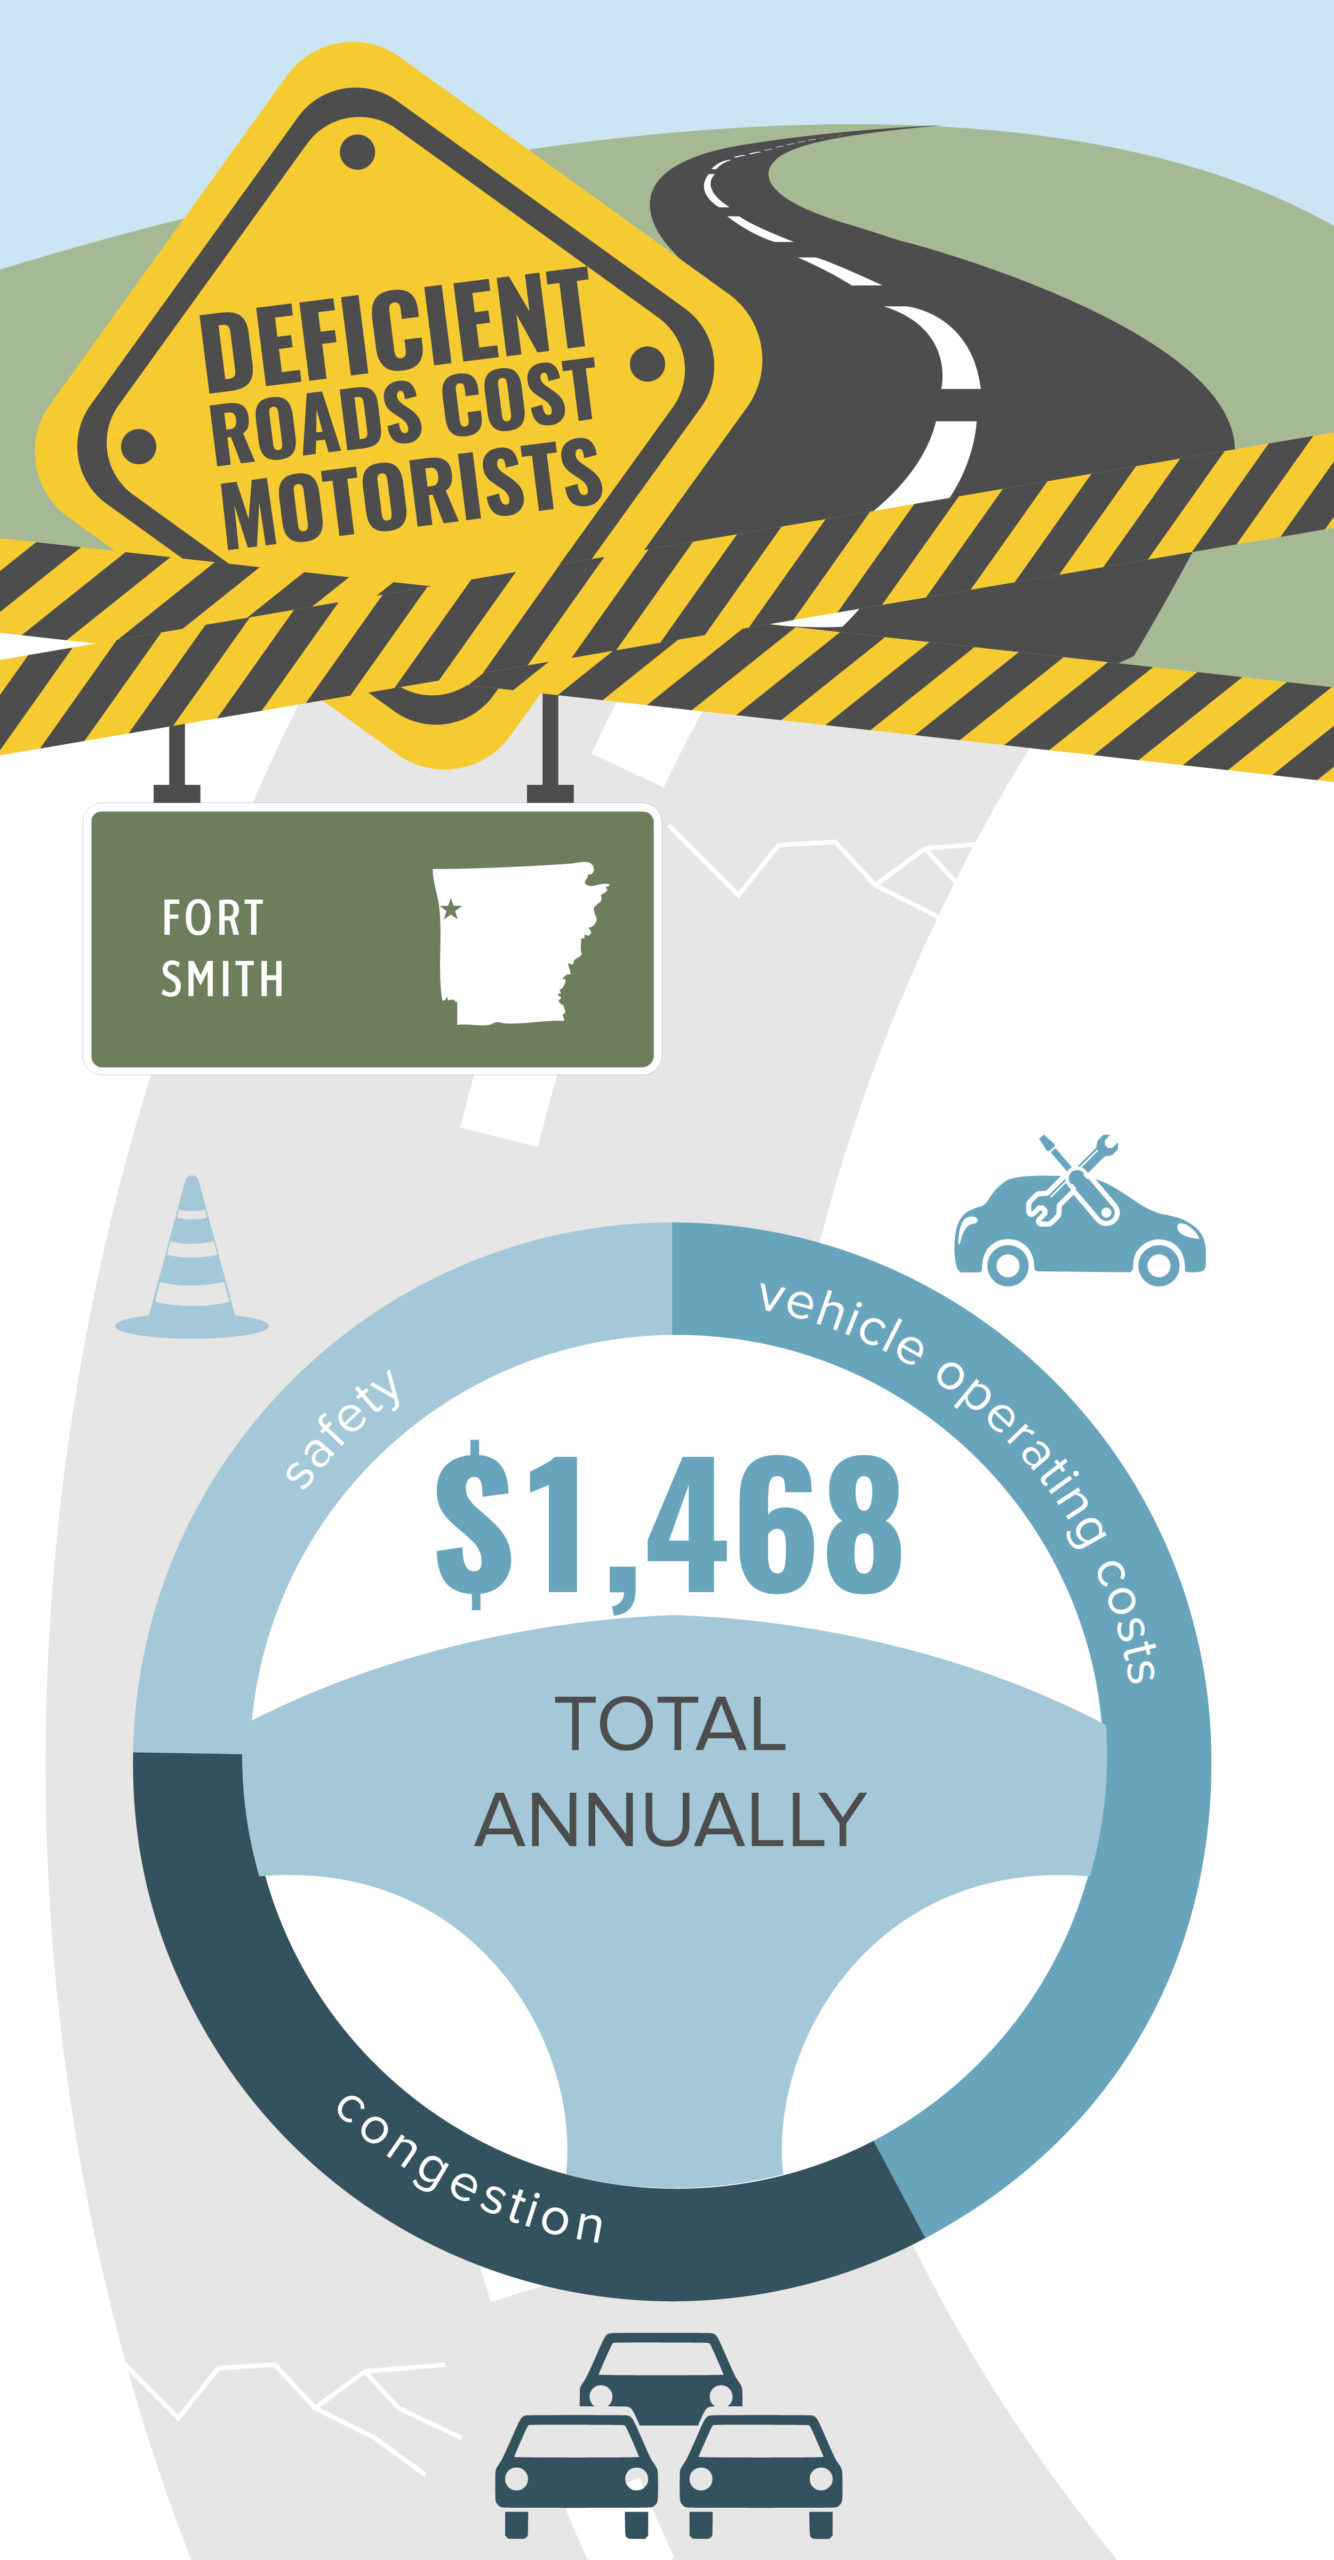 Fort Smith Deficient Roads Infographic – September 2020